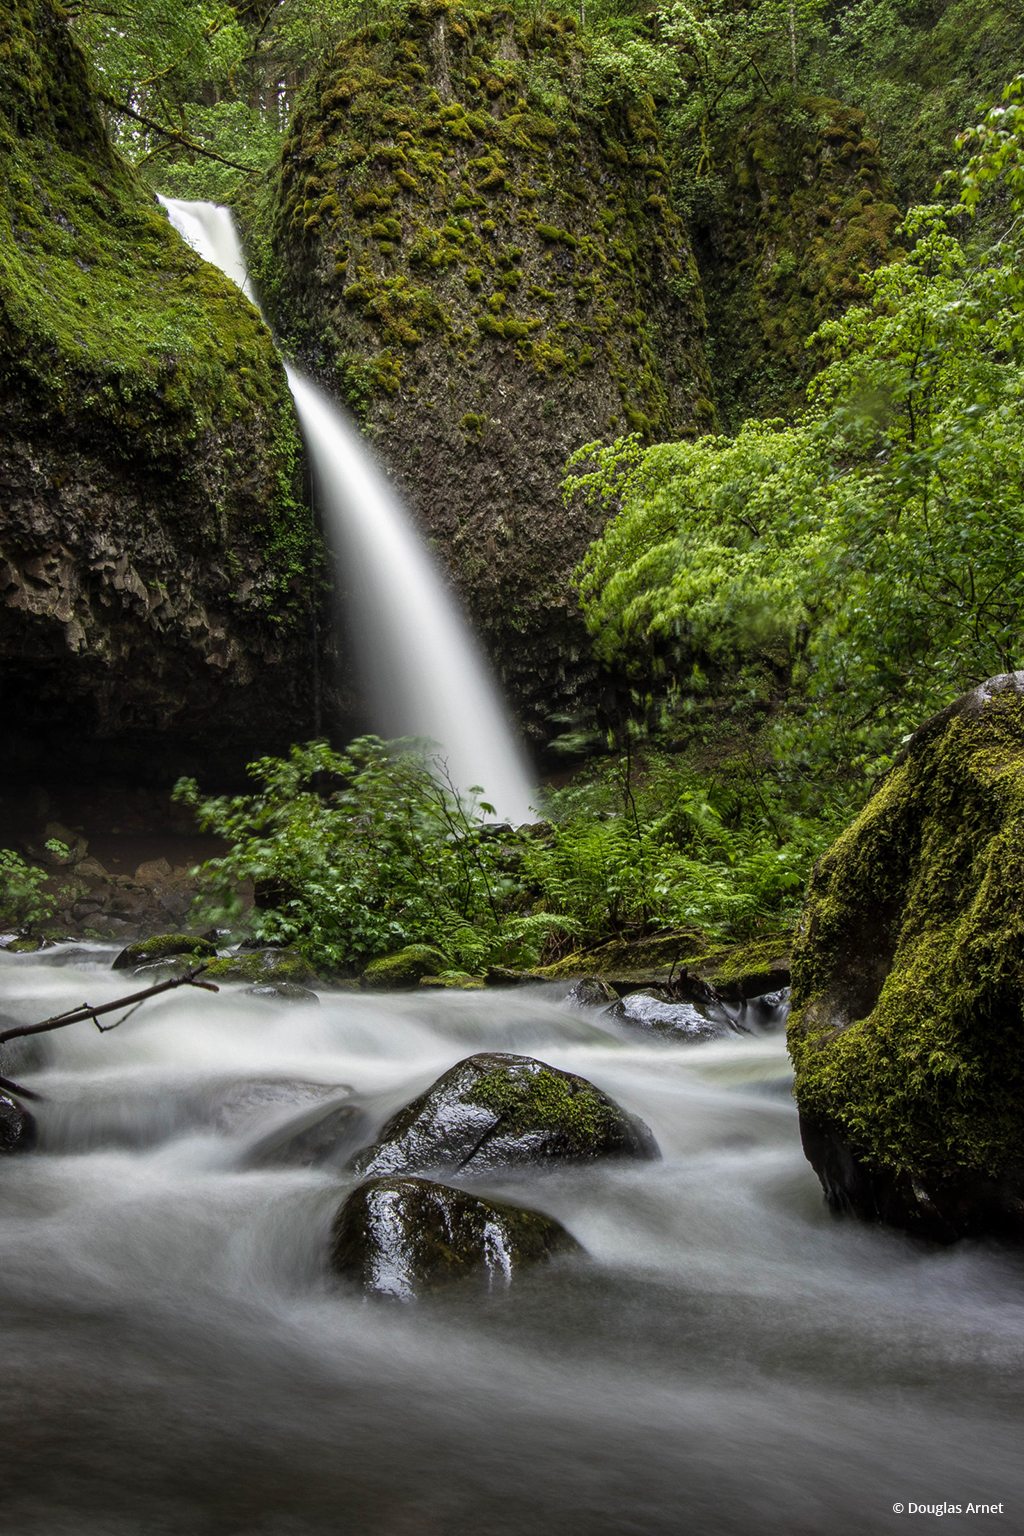 Today’s Photo Of The Day is “Ponytail” by Douglas Arnet. Location: Columbia River Gorge, Oregon. 